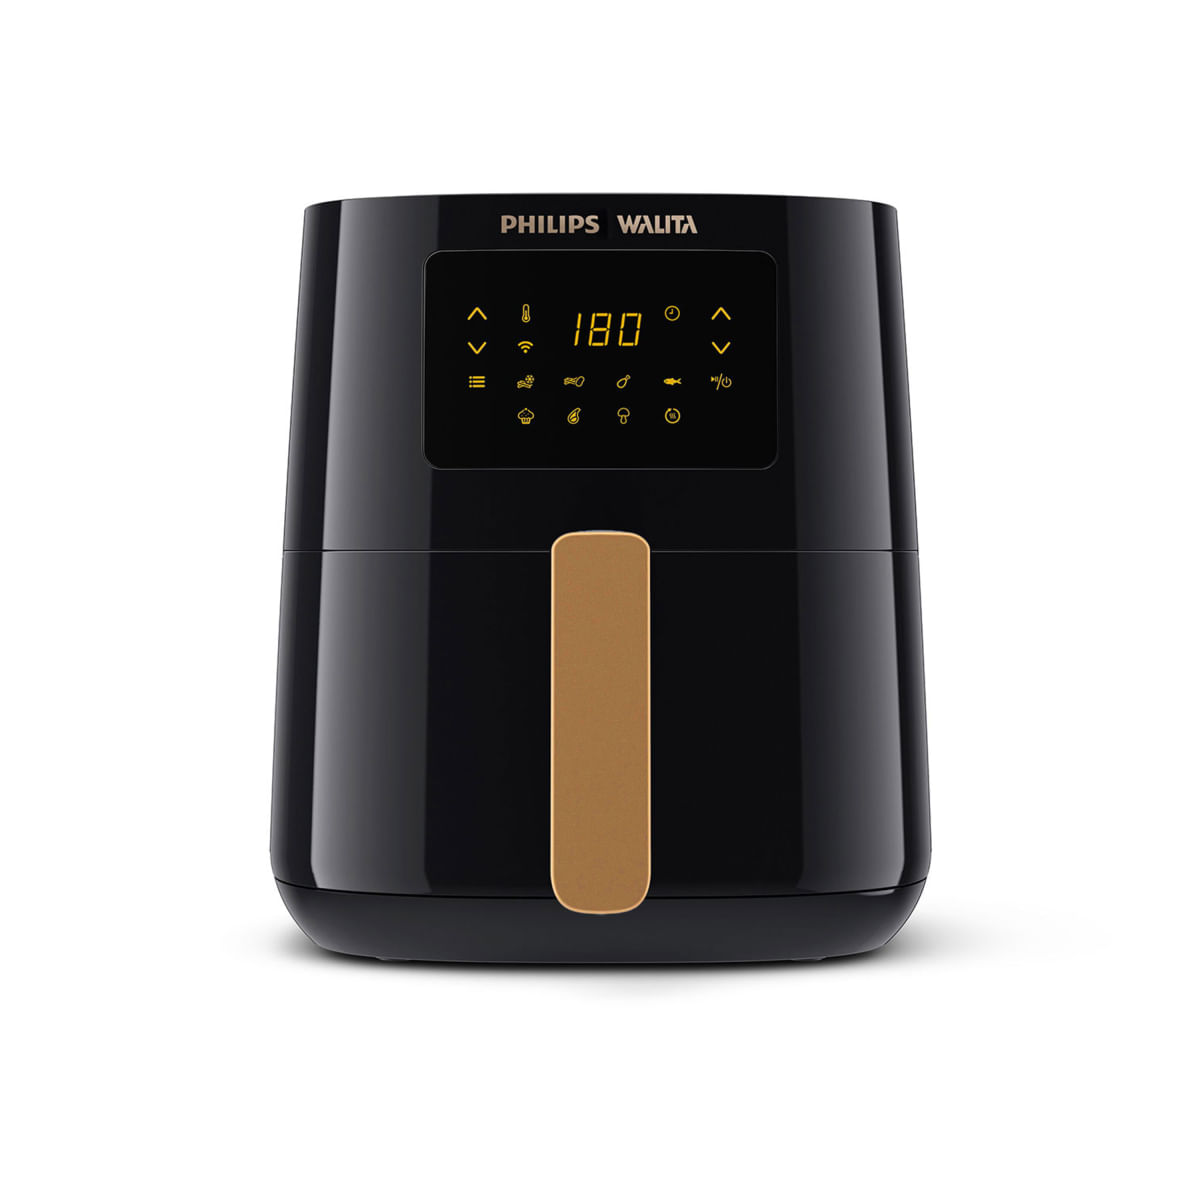 Fritadeira Elétrica Airfryer High Connect Gold Philips Walita 4,1L ND / 110